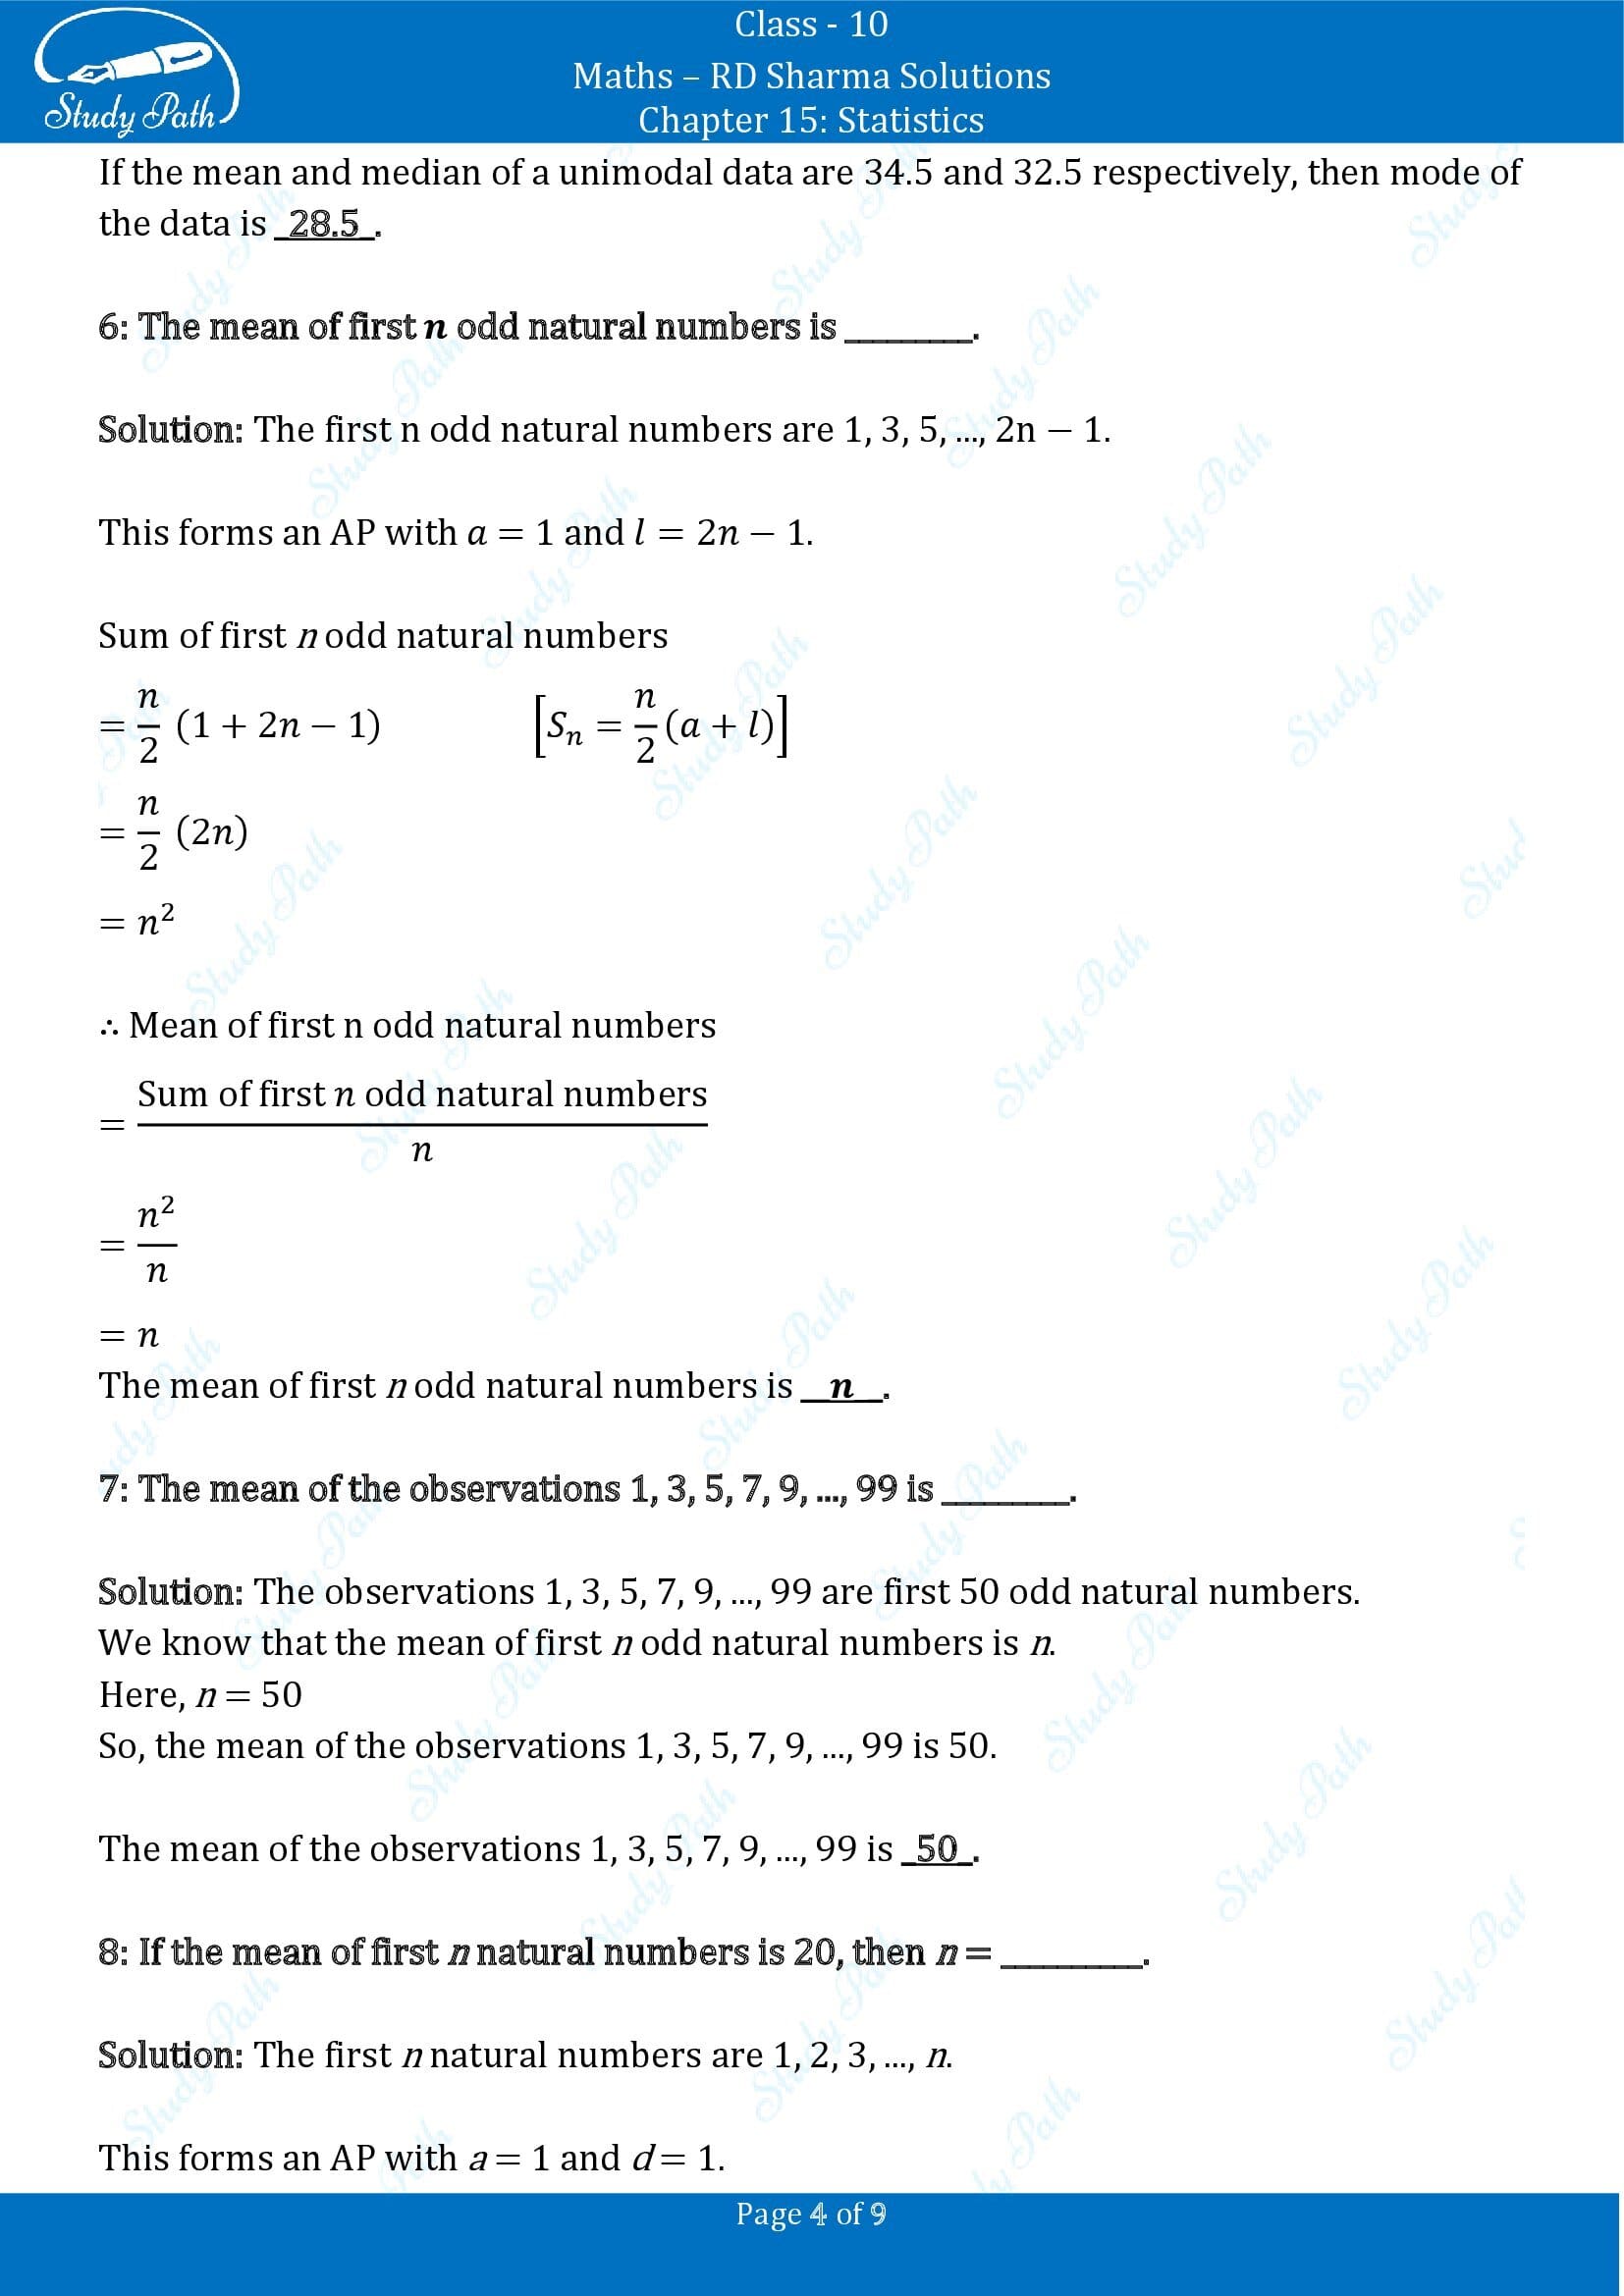 RD Sharma Solutions Class 10 Chapter 15 Statistics Fill in the Blank Type Questions FBQs 00004